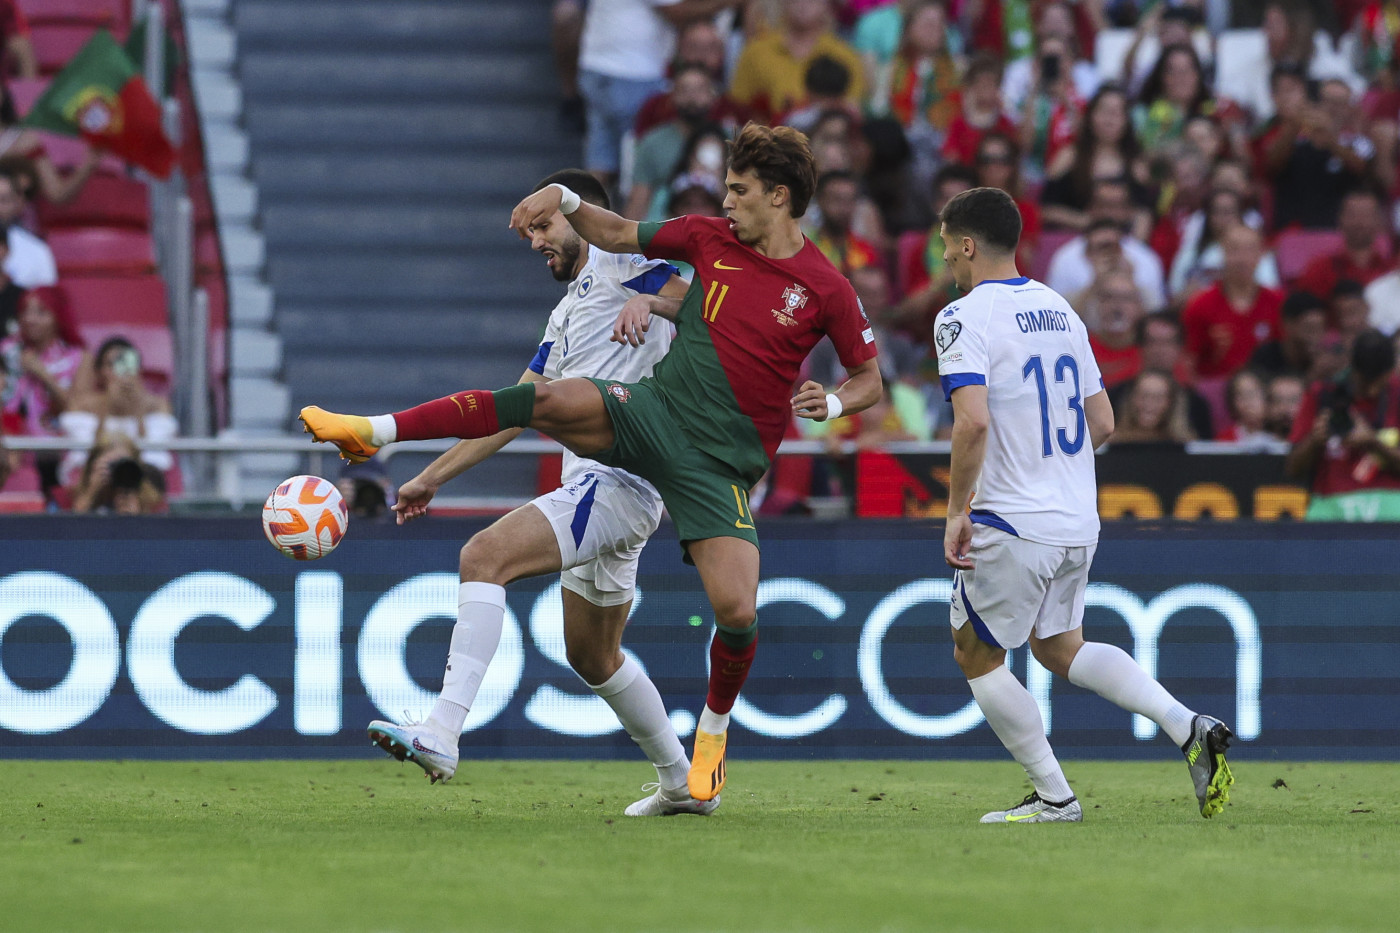 Joao Felix of Portugal in action during the UEFA EURO 2024 European News  Photo - Getty Images